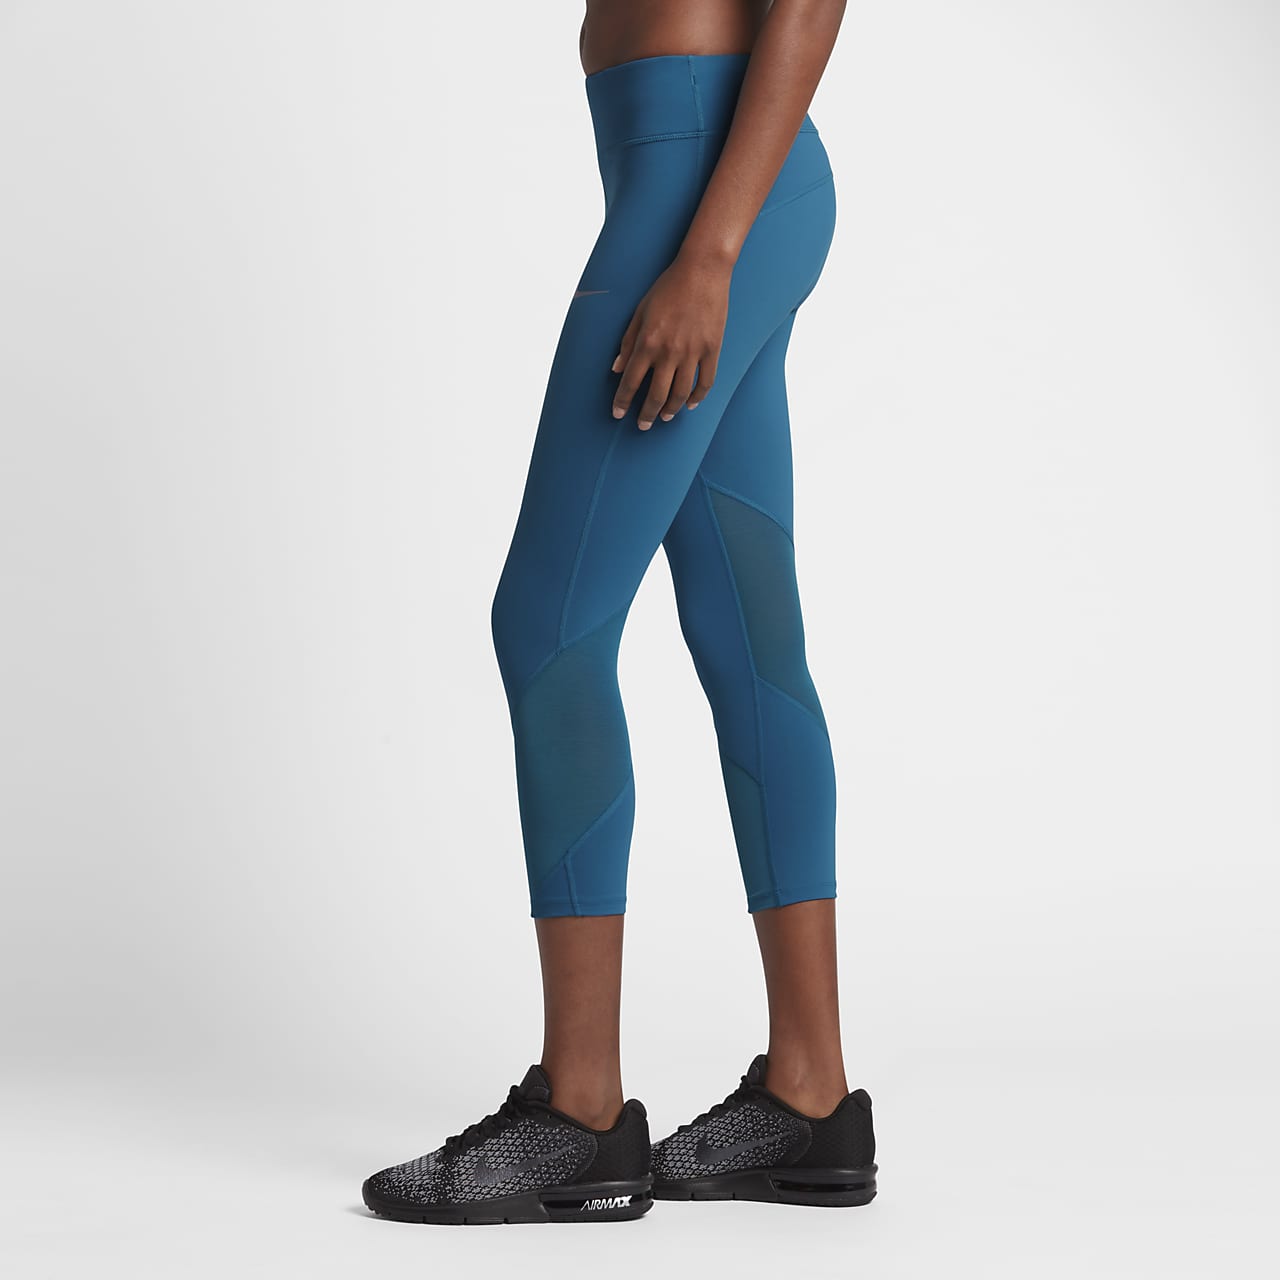 Nike Epic Luxe Women's Running Crop Tights CN8043-630 M (Pink